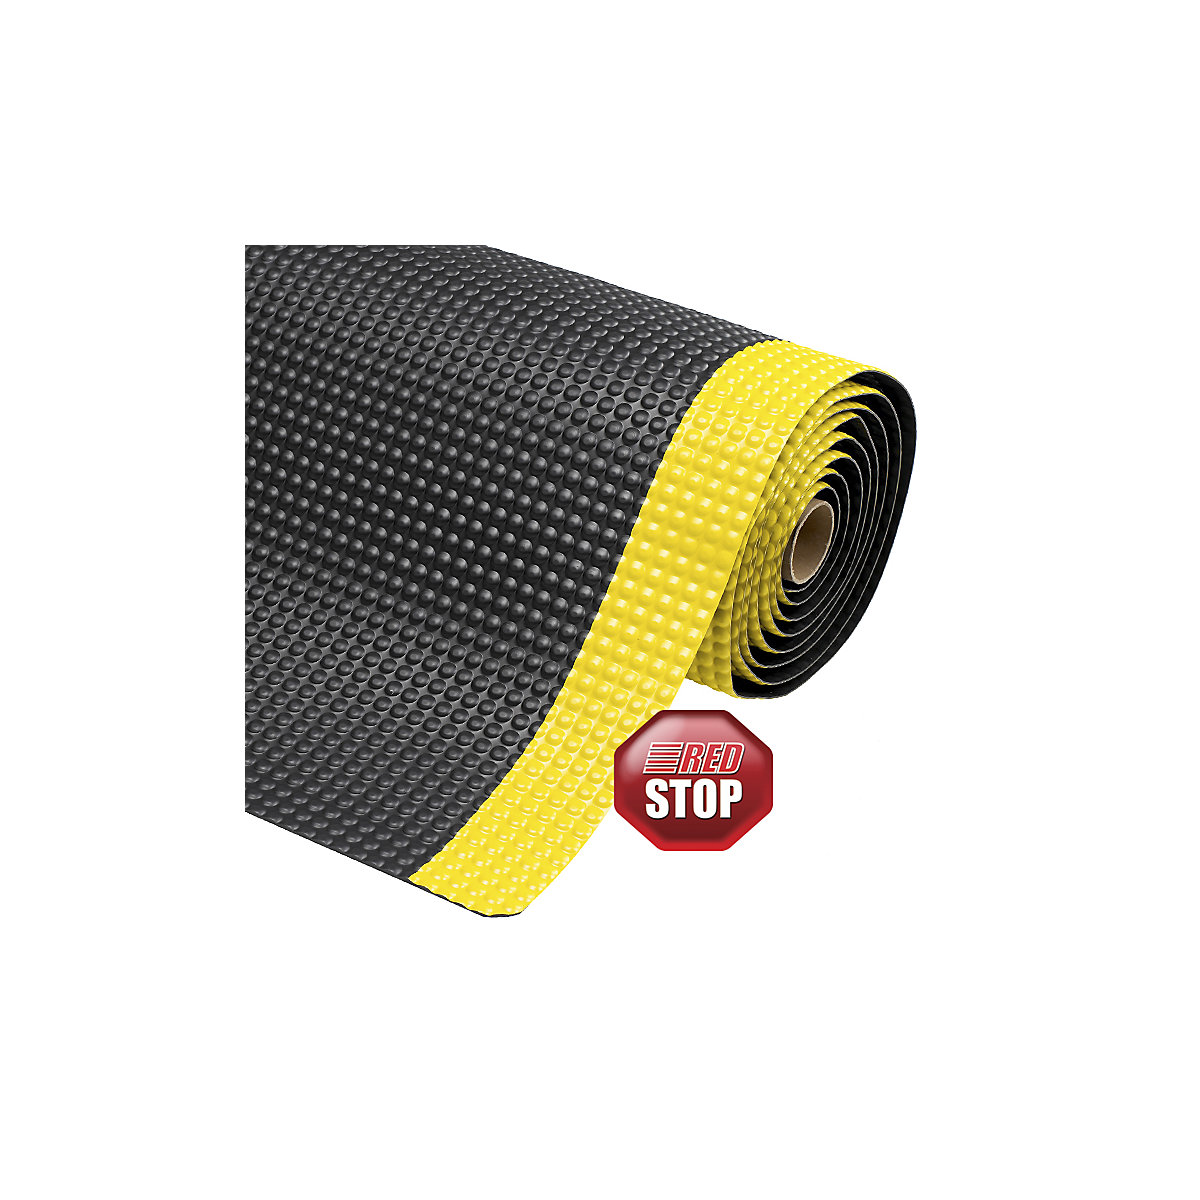 Sky Trax® workstation matting – NOTRAX, width 1220 mm, sold by the metre, black / yellow-4